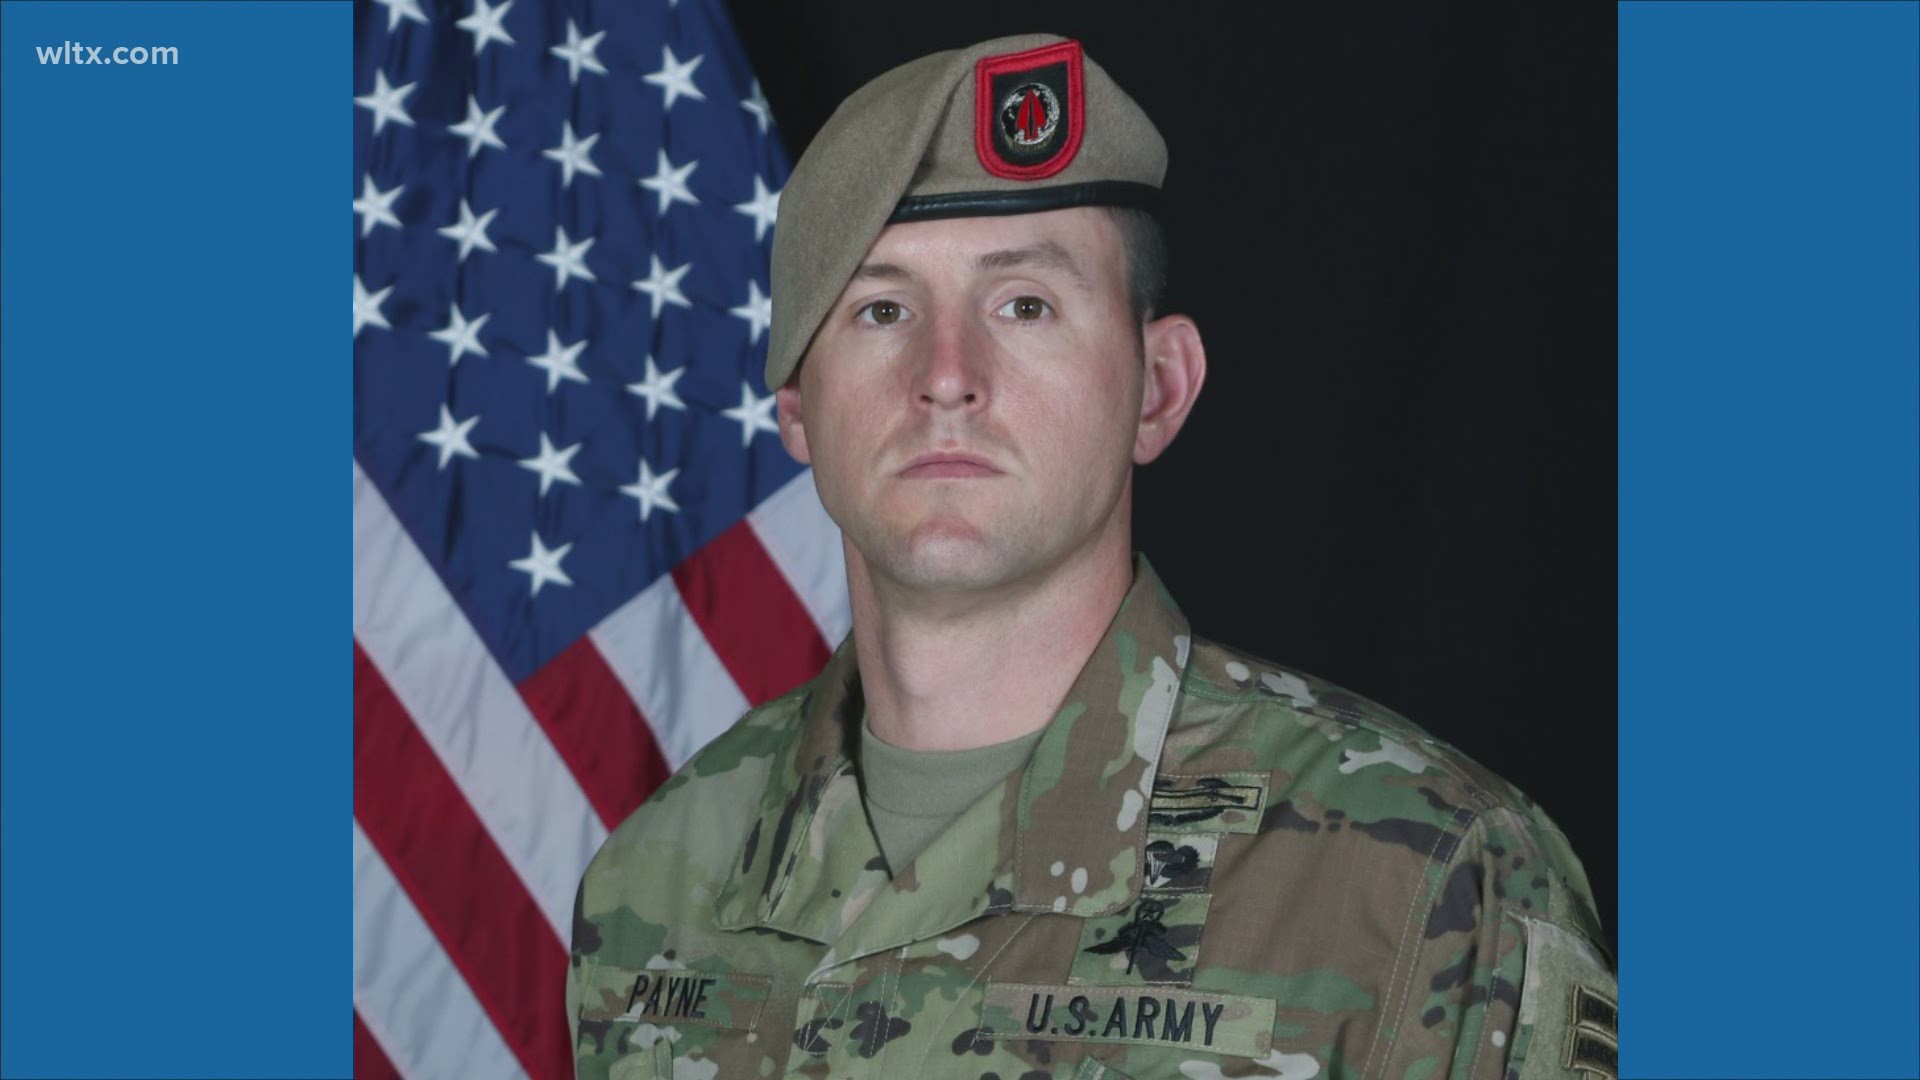 Sergeant Major Thomas Payne, a South Carolina native, is set to receive the Medal of Honor for actions during a daring 2015 raid where he rescued 70 hostages.